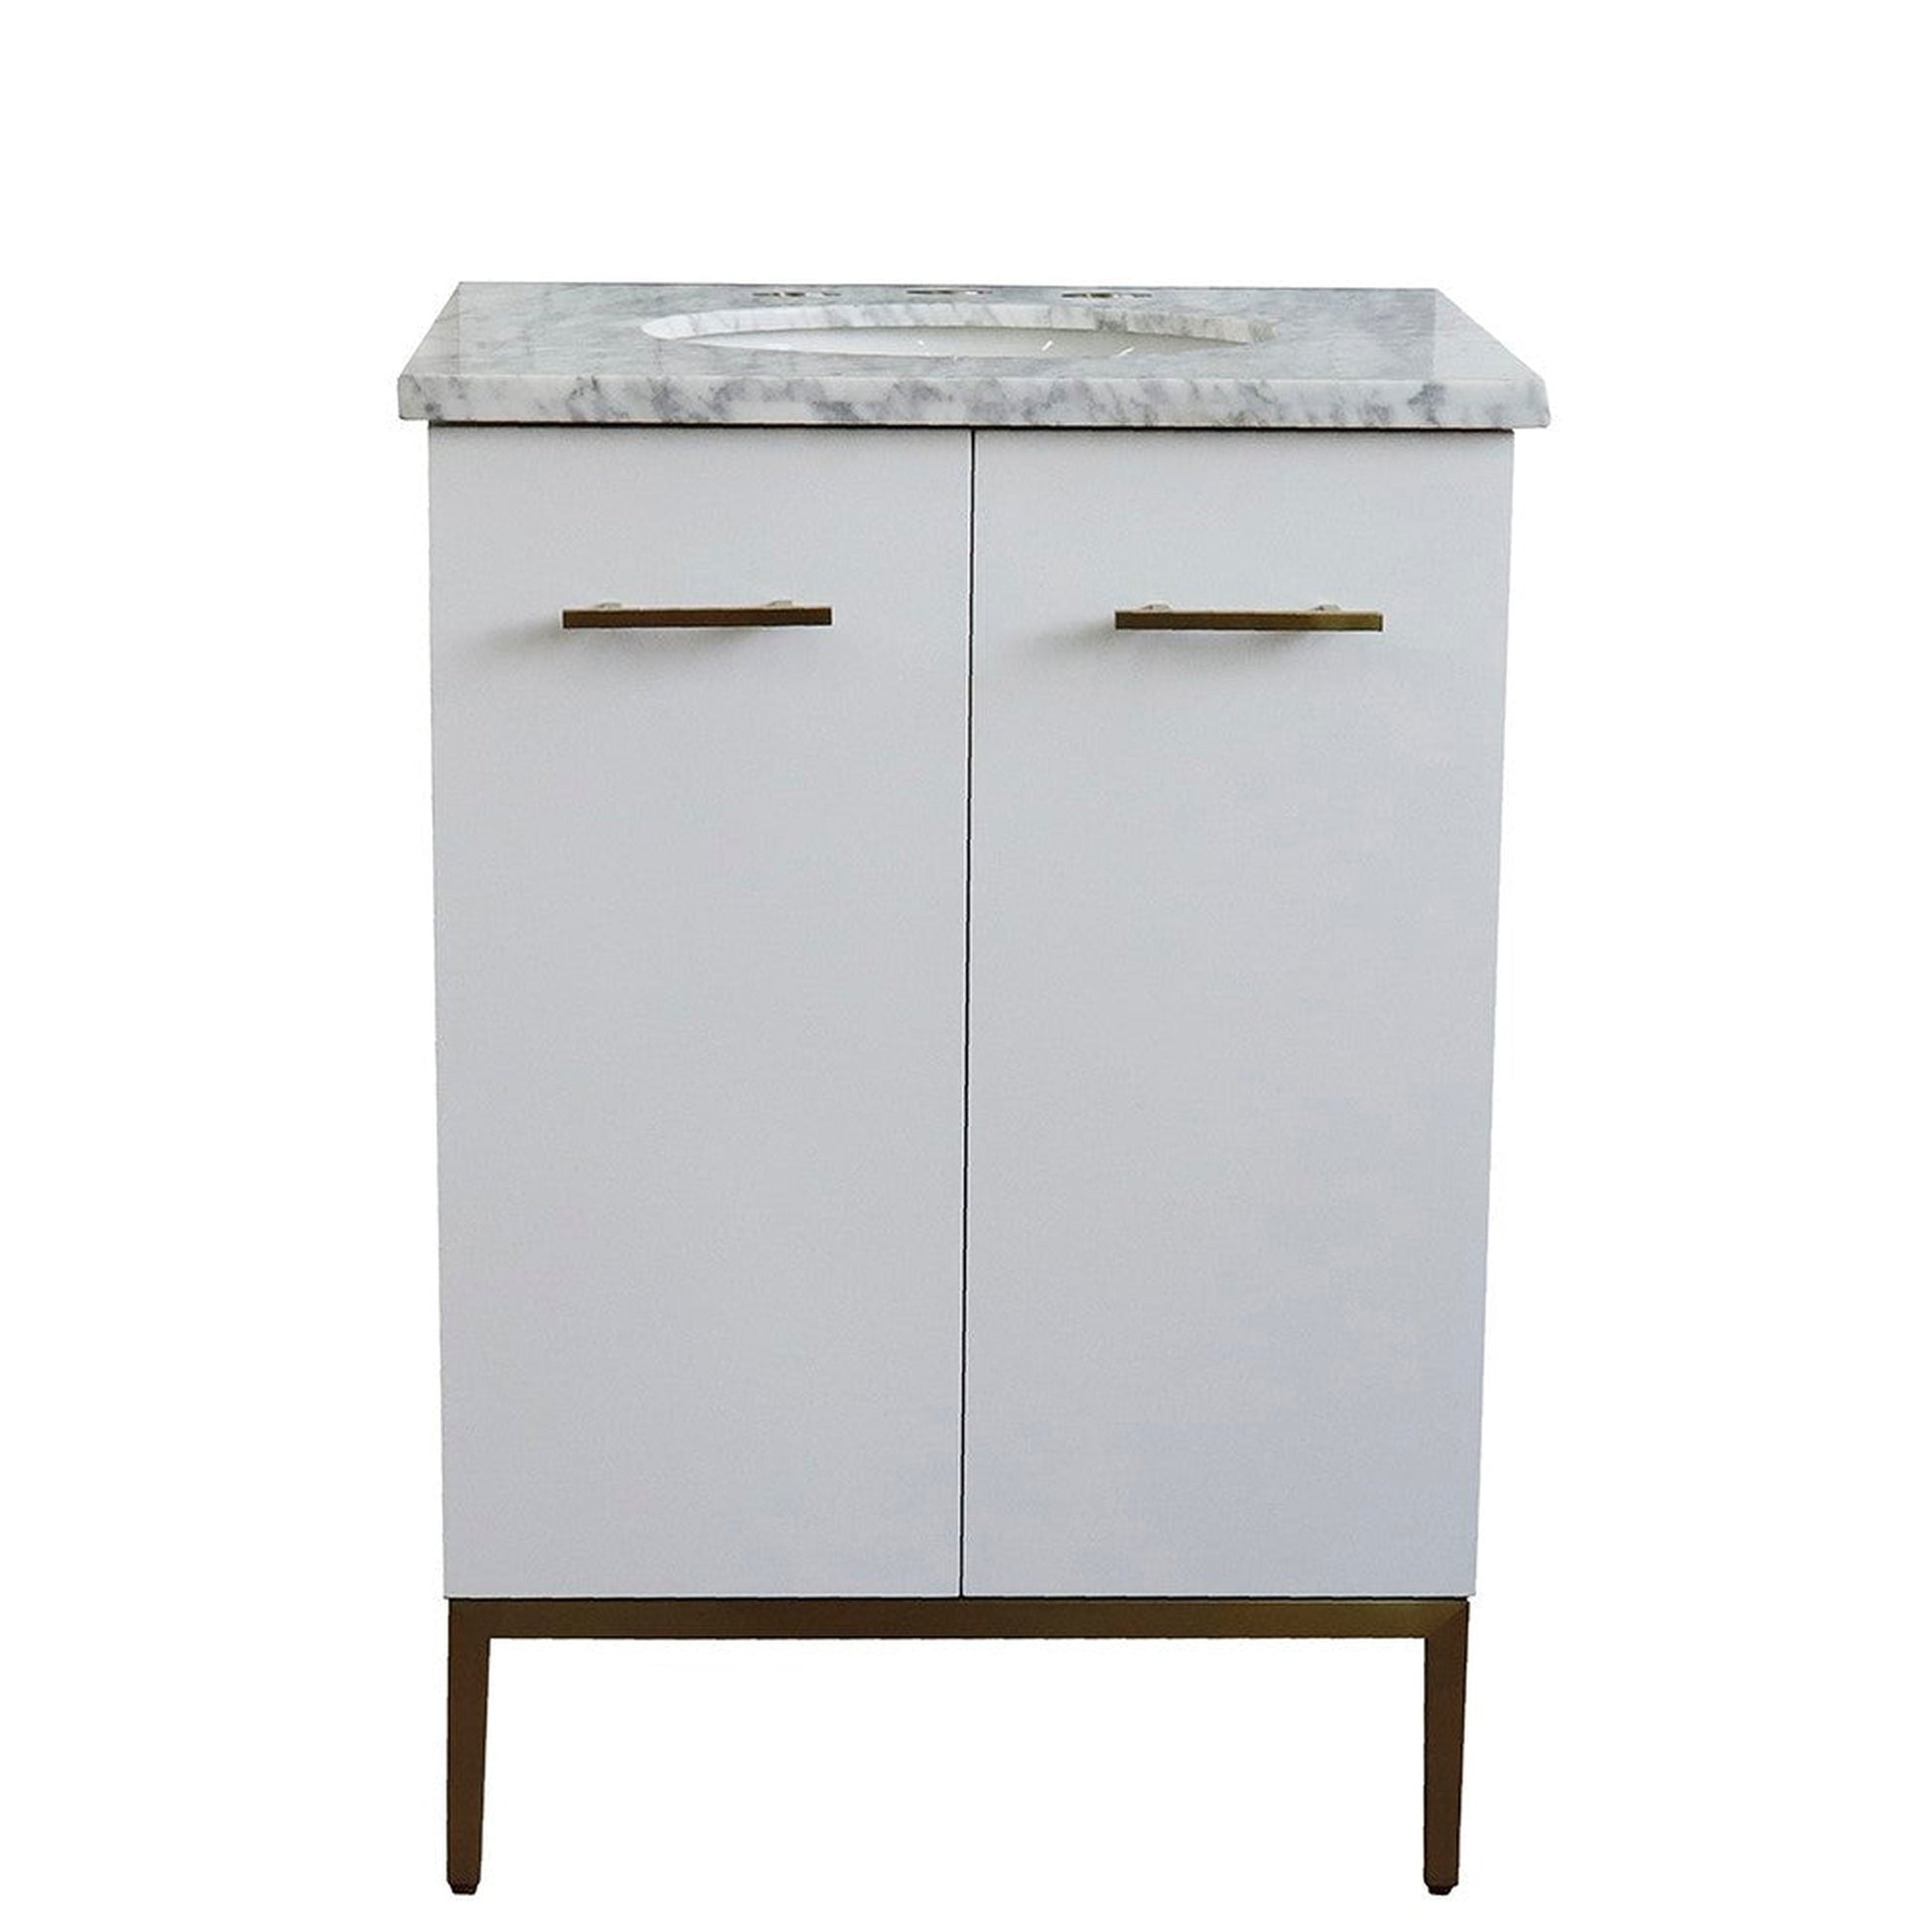 Bellaterra Home Tivoli 25" 2-Door 1-Drawer White Freestanding Vanity Set With Ceramic Undermount Oval Sink and White Carrara Marble Top